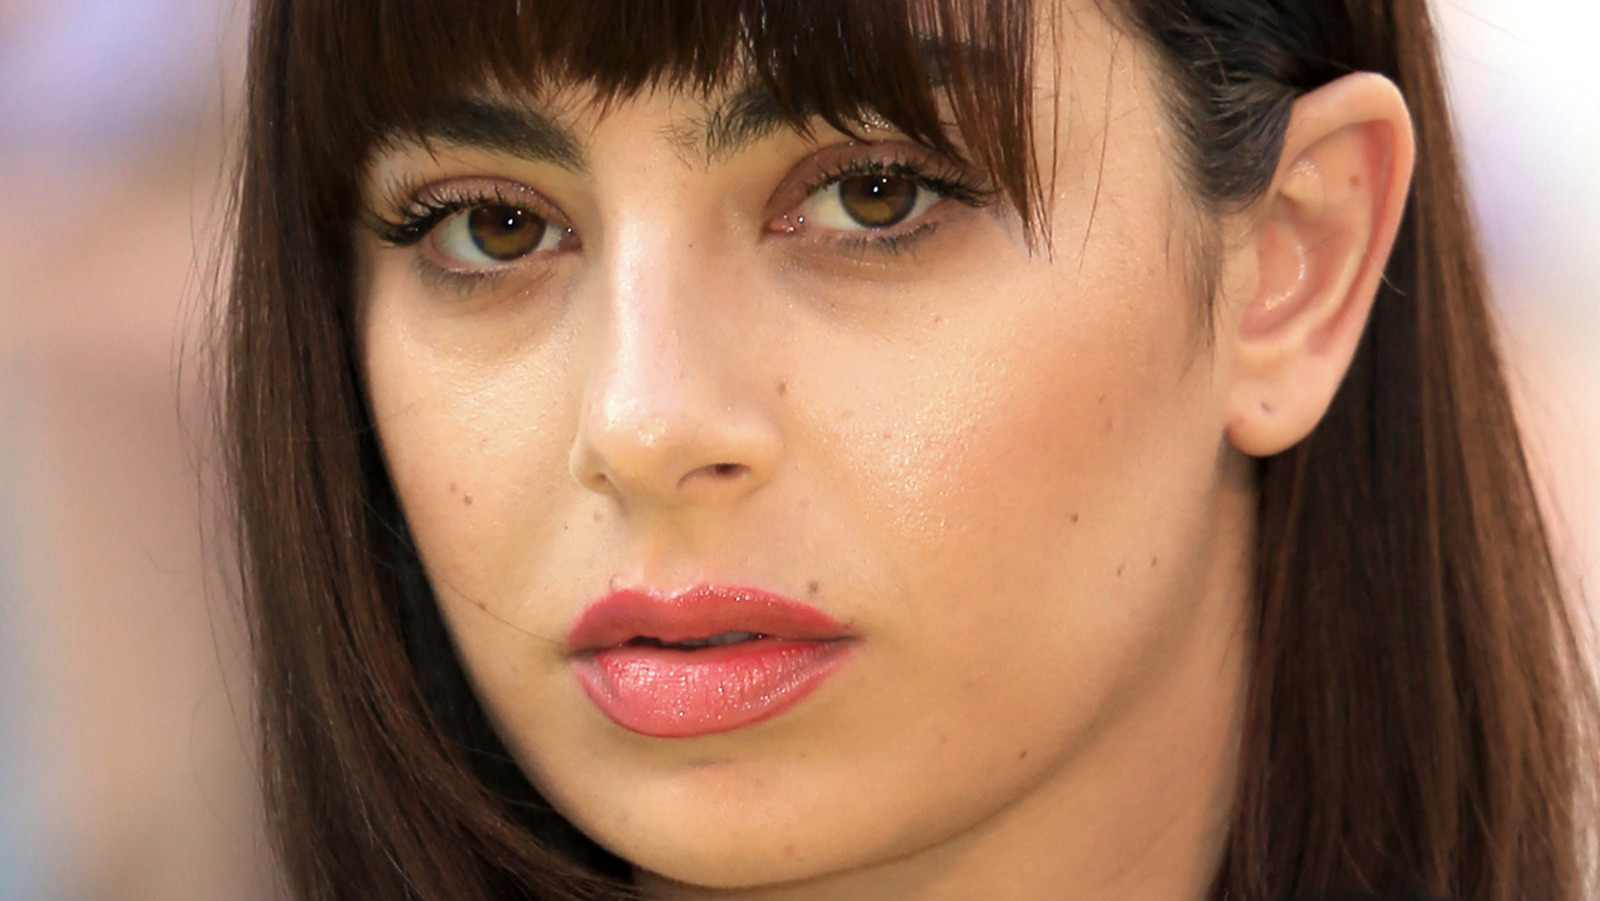 What We Know About Charli XCX's Love Life